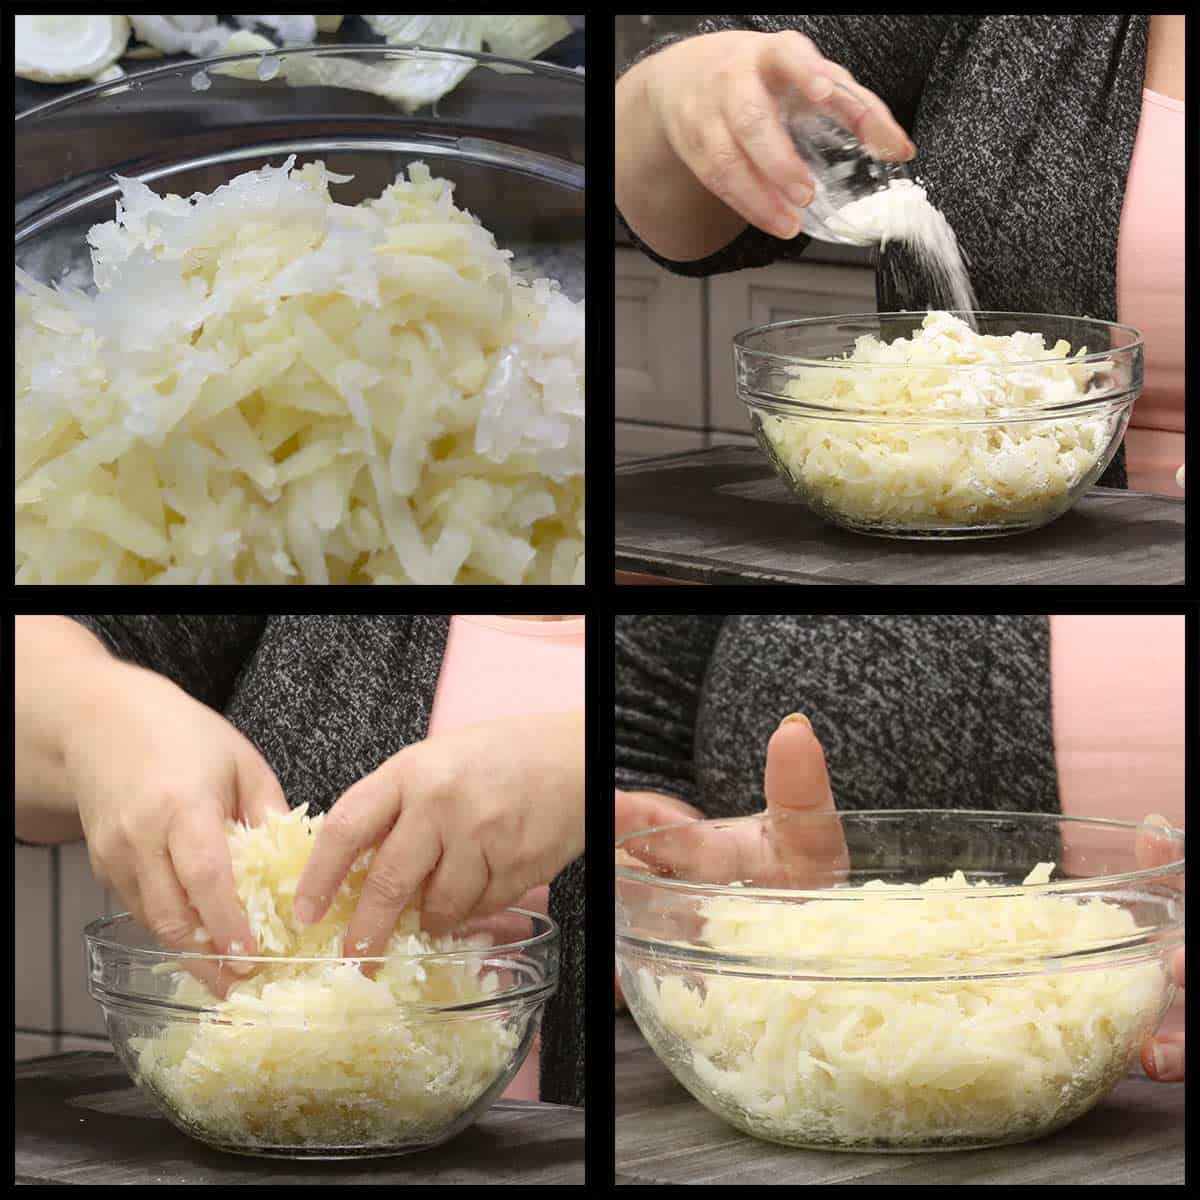 Adding the remaining ingredients to the bowl of shredded potatoes and mixing with hands to incorporate. 